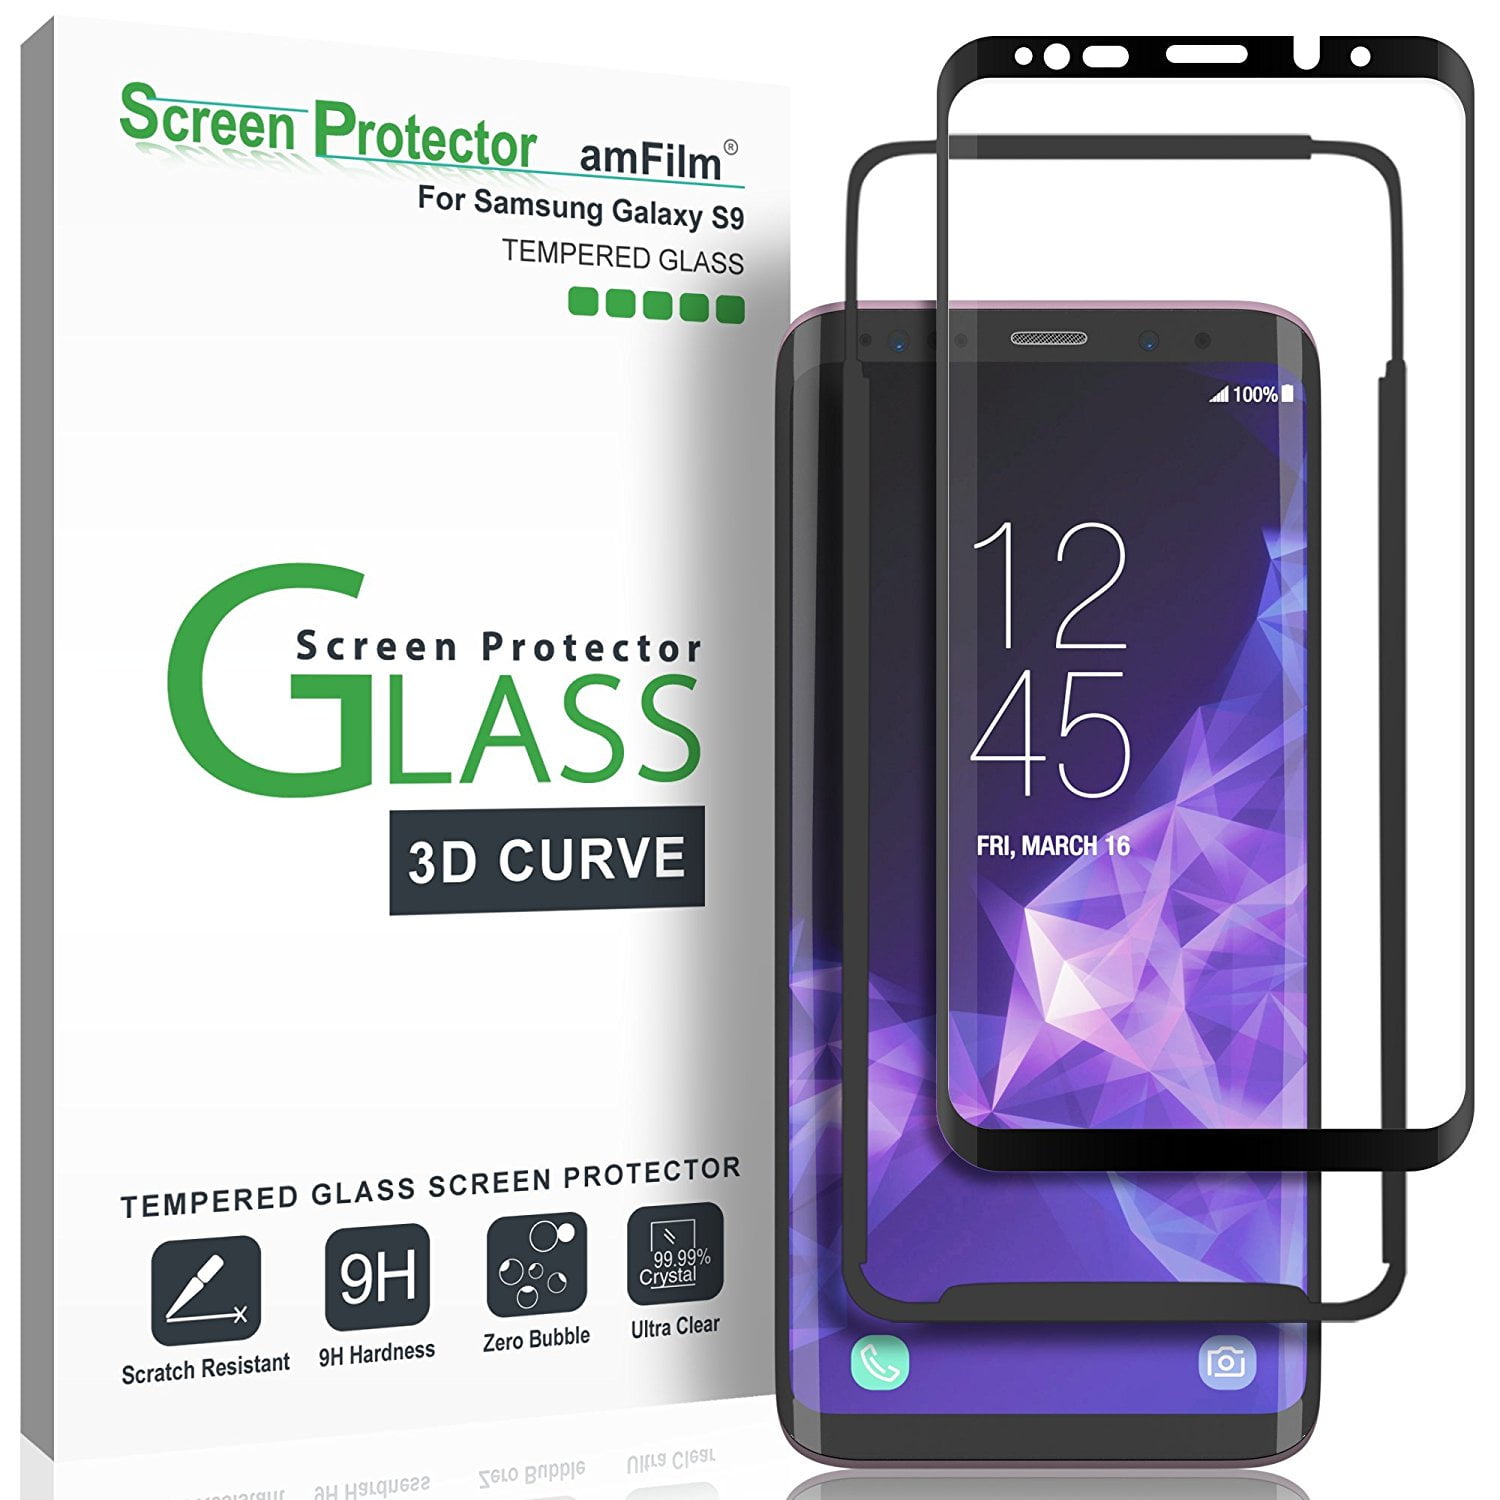 1 Pack Anti Scratch Screen Protector Glass for Samsung Galaxy J7 2016 Galaxy J7 2016 Tempered Glass Screen Protector Bear Village Ultra Clear Screen Protector 